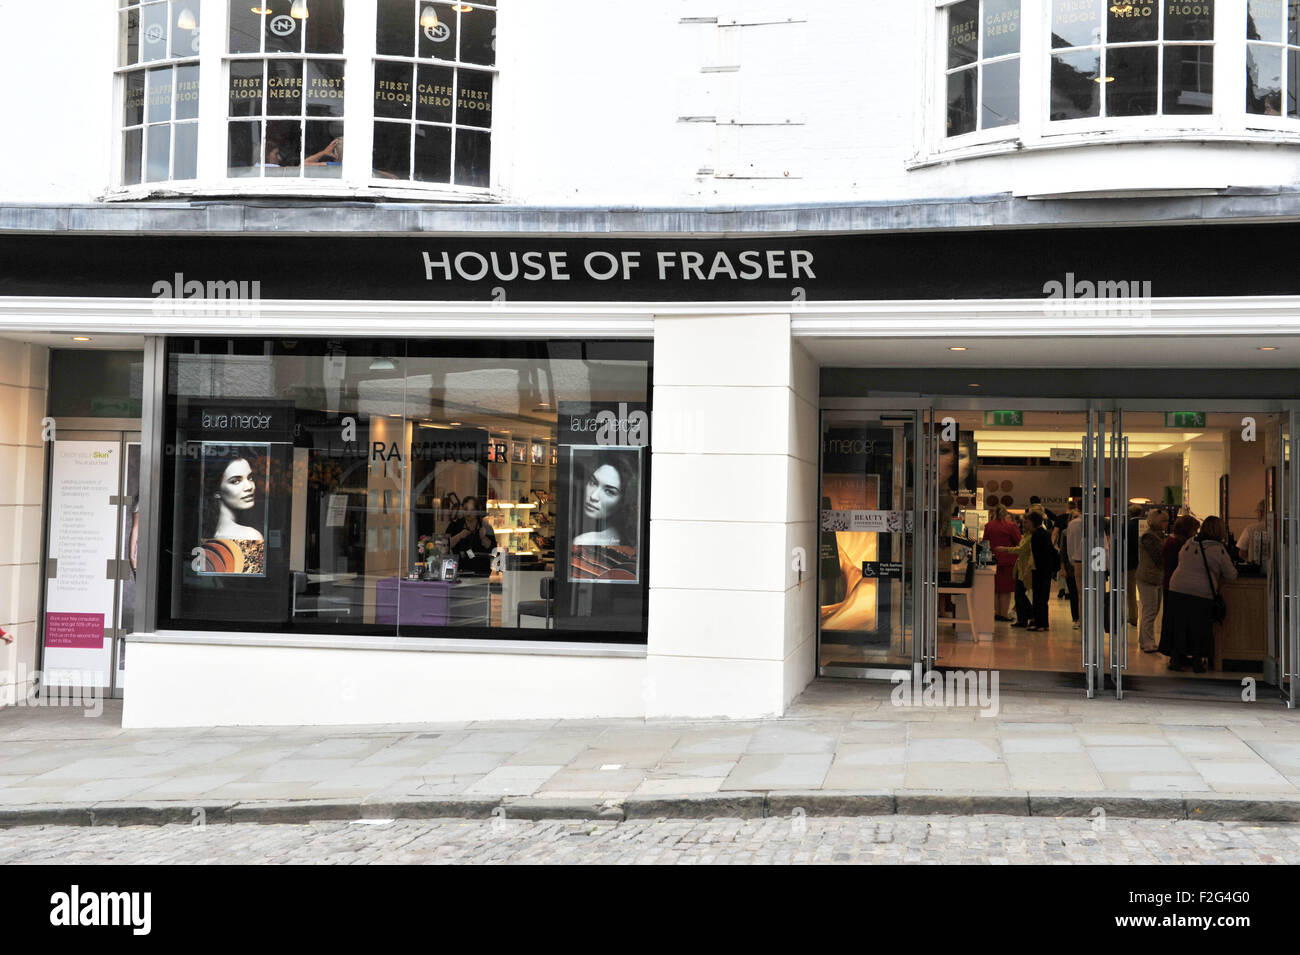 Guildford Surrey UK - House of Fraser department store in The High Street Stock Photo